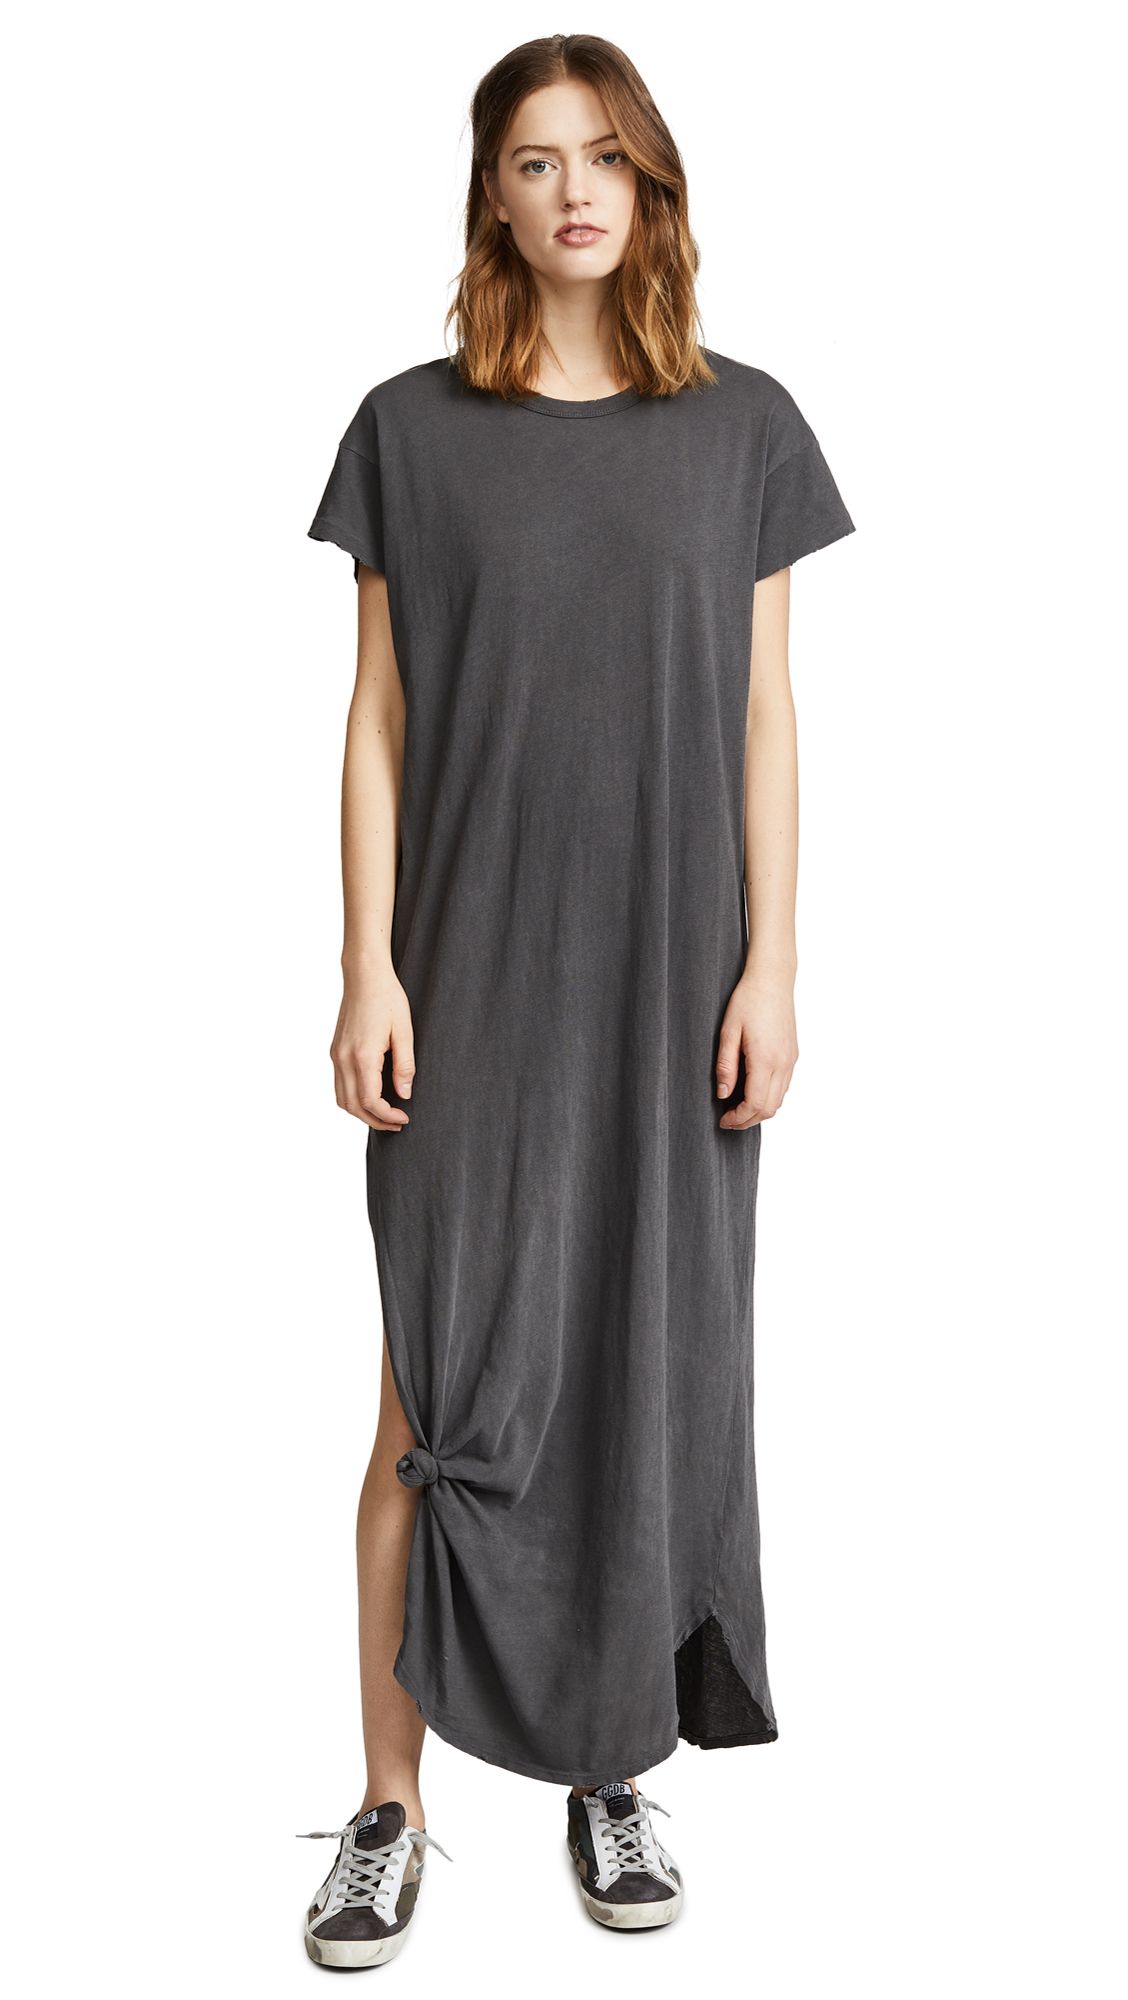 THE GREAT. The Knotted Tee Dress | Shopbop